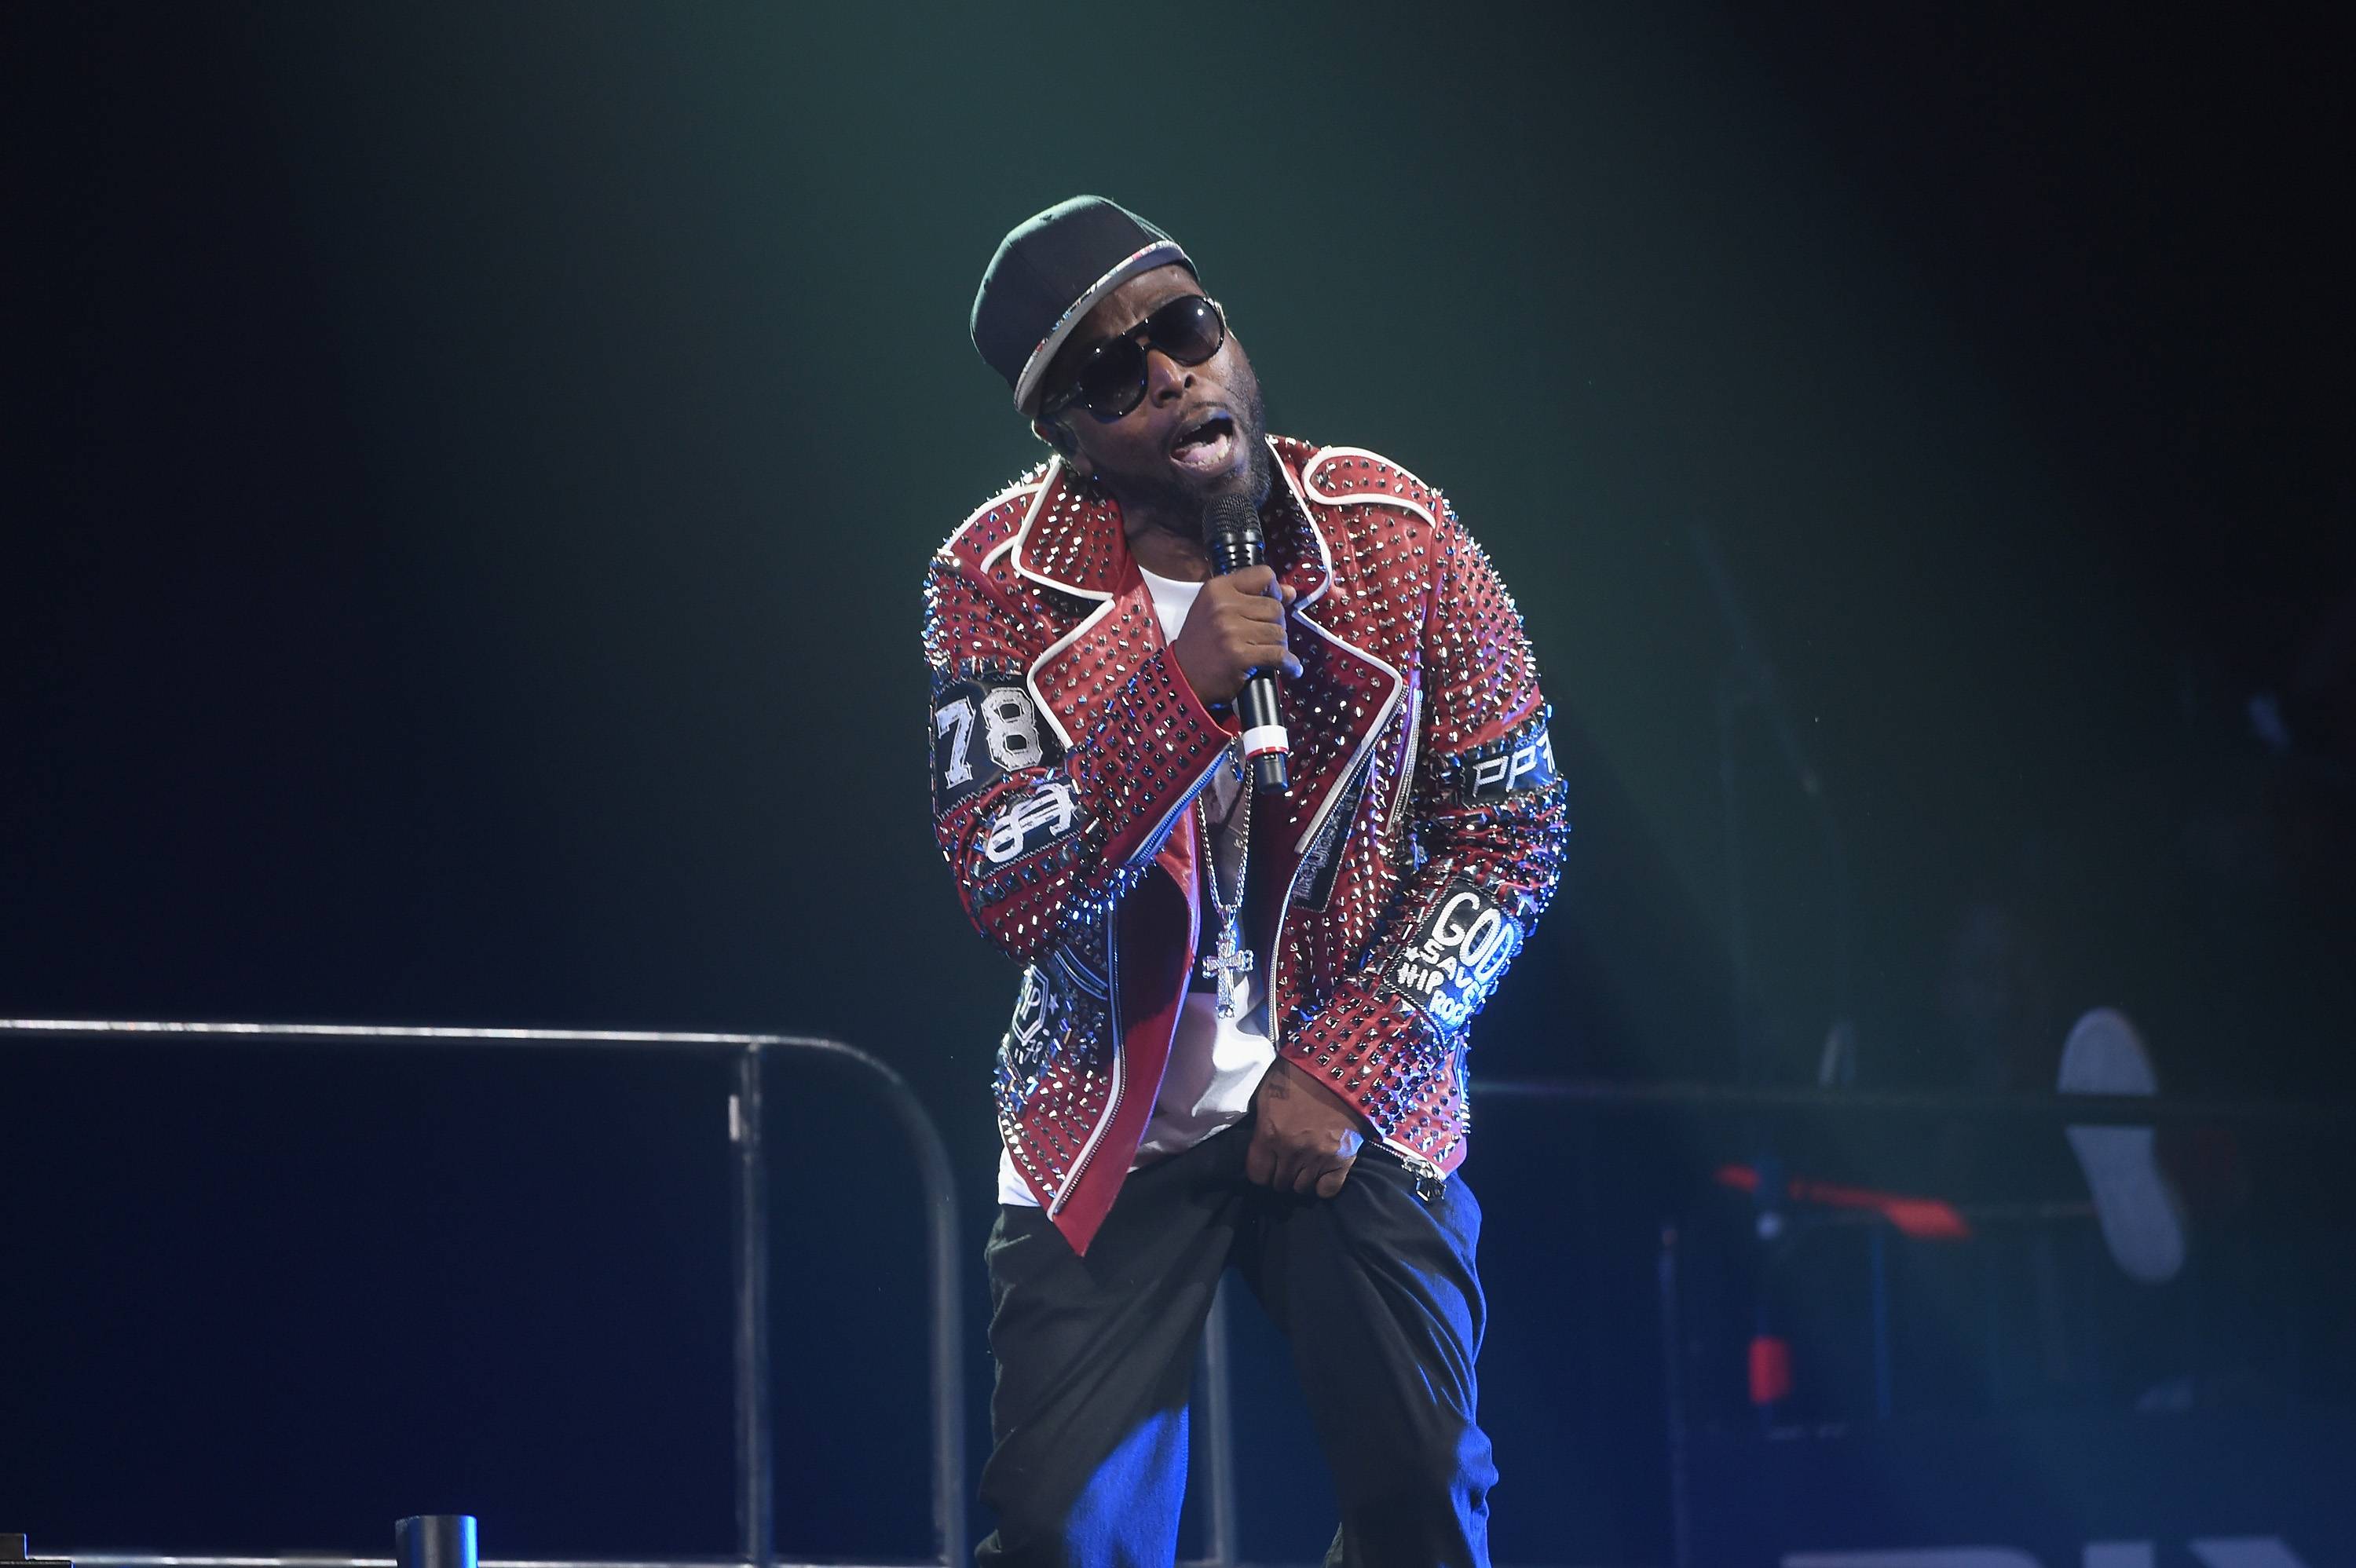 NEW YORK, NY - MAY 20:  Black Rob performs onstage during the Puff Daddy and The Family Bad Boy Reunion Tour presented by Ciroc Vodka And Live Nation at Barclays Center on May 20, 2016 in New York City.  (Photo by Jamie McCarthy/Getty Images for Live Nation)